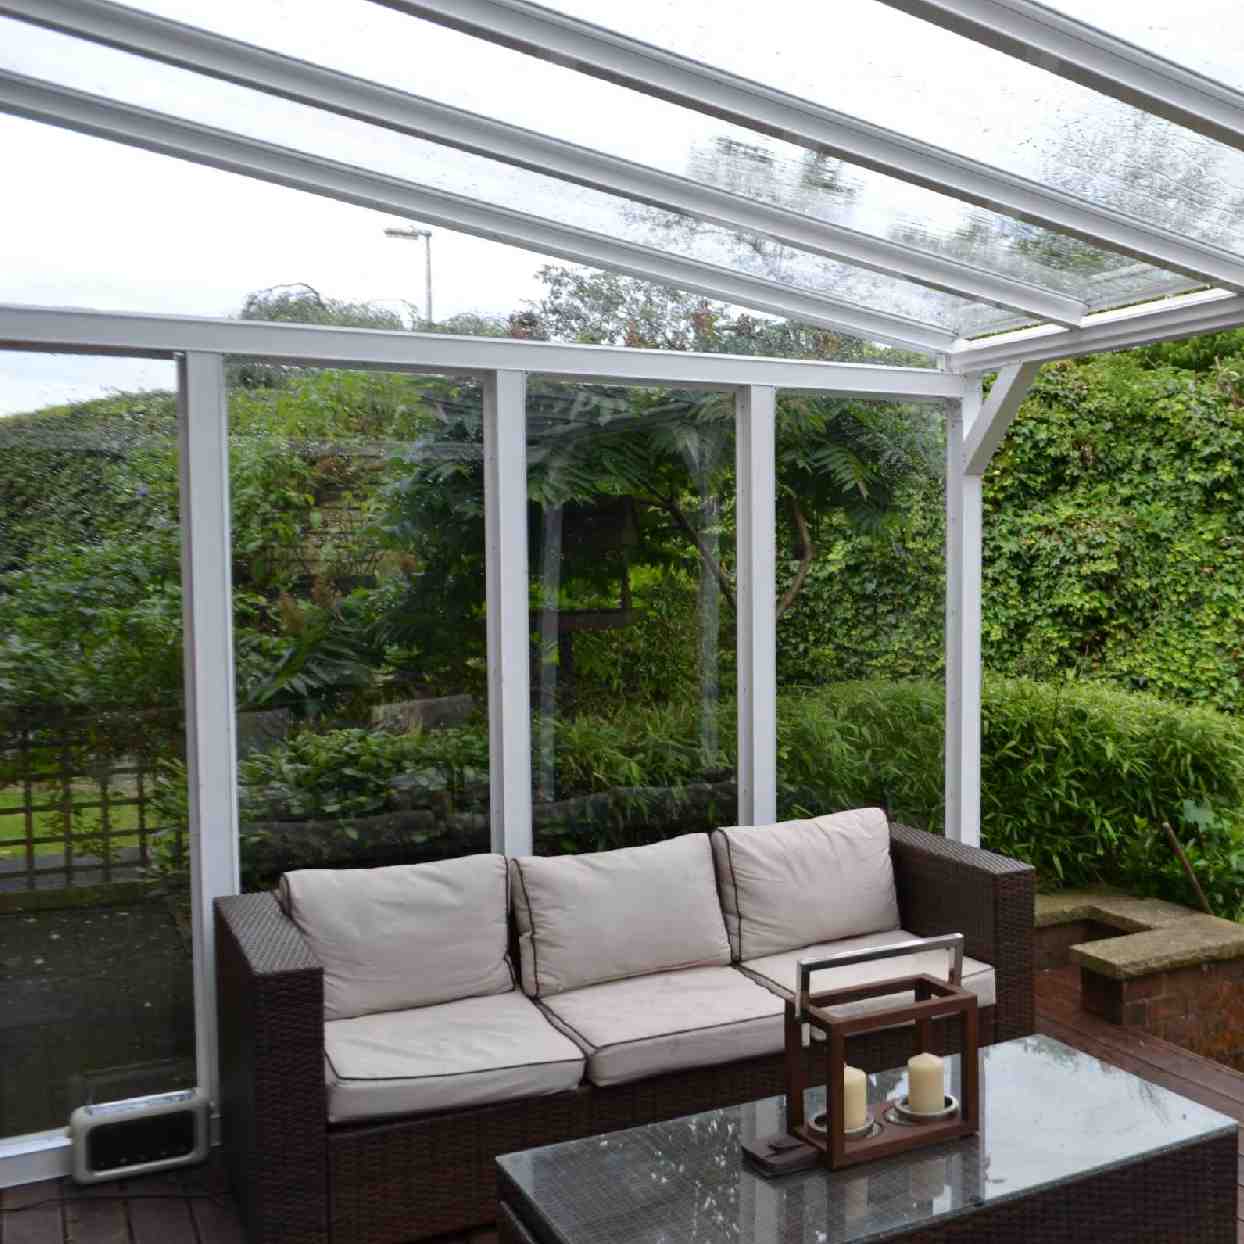 Buy Omega Verandah White with 6mm Glass Clear Plate Polycarbonate Glazing - 4.9m (W) x 3.5m (P), (3) Supporting Posts online today